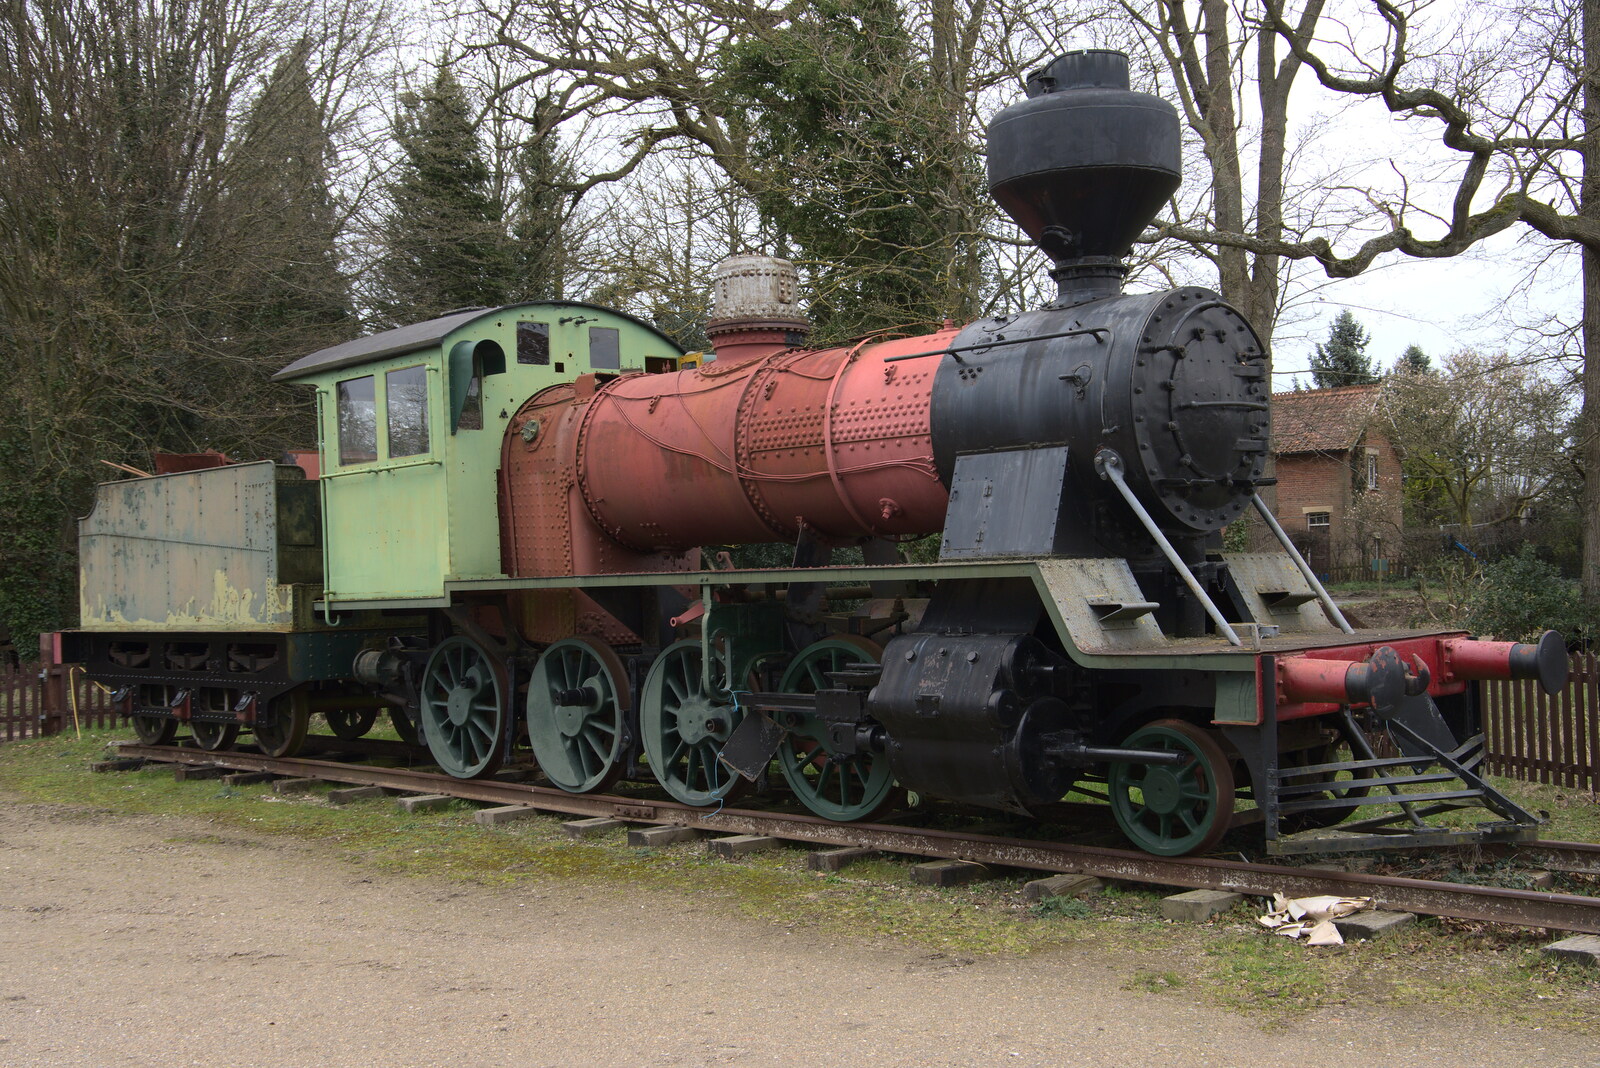 The South American engine now has a cab from A Return to Bressingham Steam and Gardens, Bressingham, Norfolk - 28th March 2021